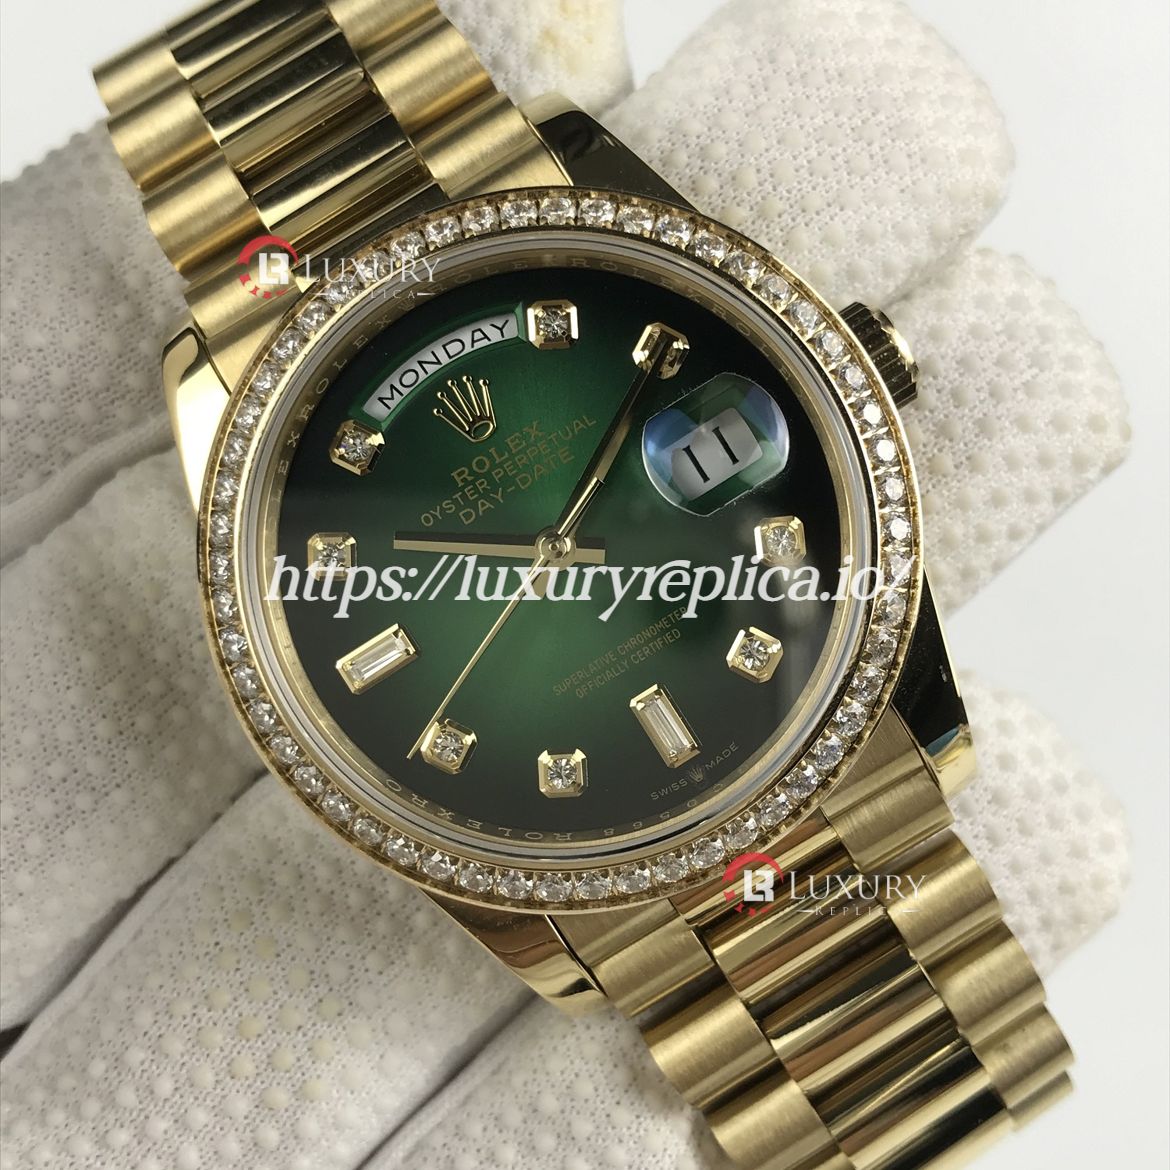 ROLEX DAY-DATE 36MM 128348RBR GREEN OMBR?? DIAL